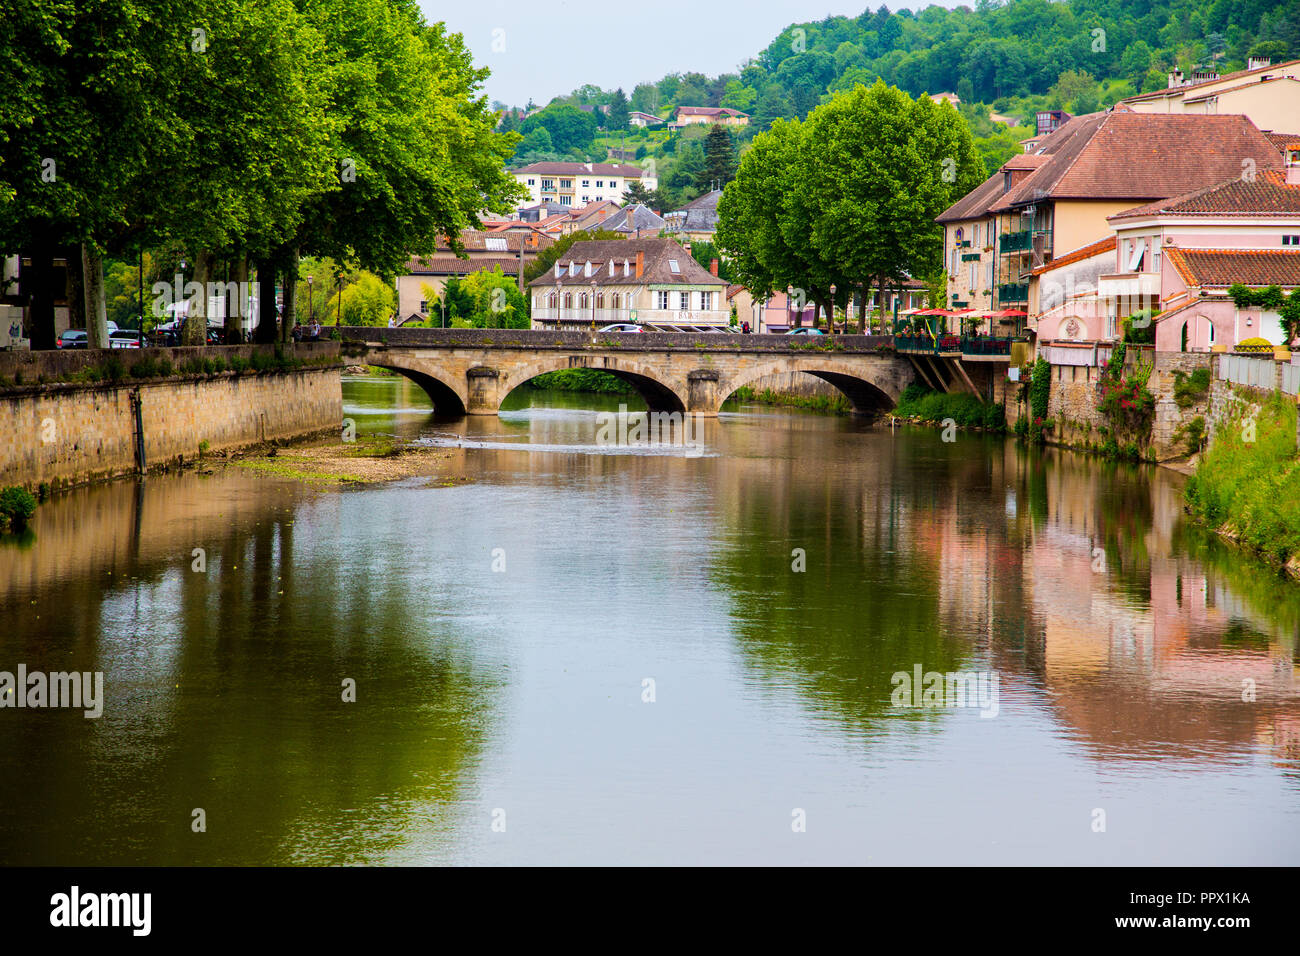 The River Cele flowing through the picturesque town of Figeac in south-west France. Stock Photo